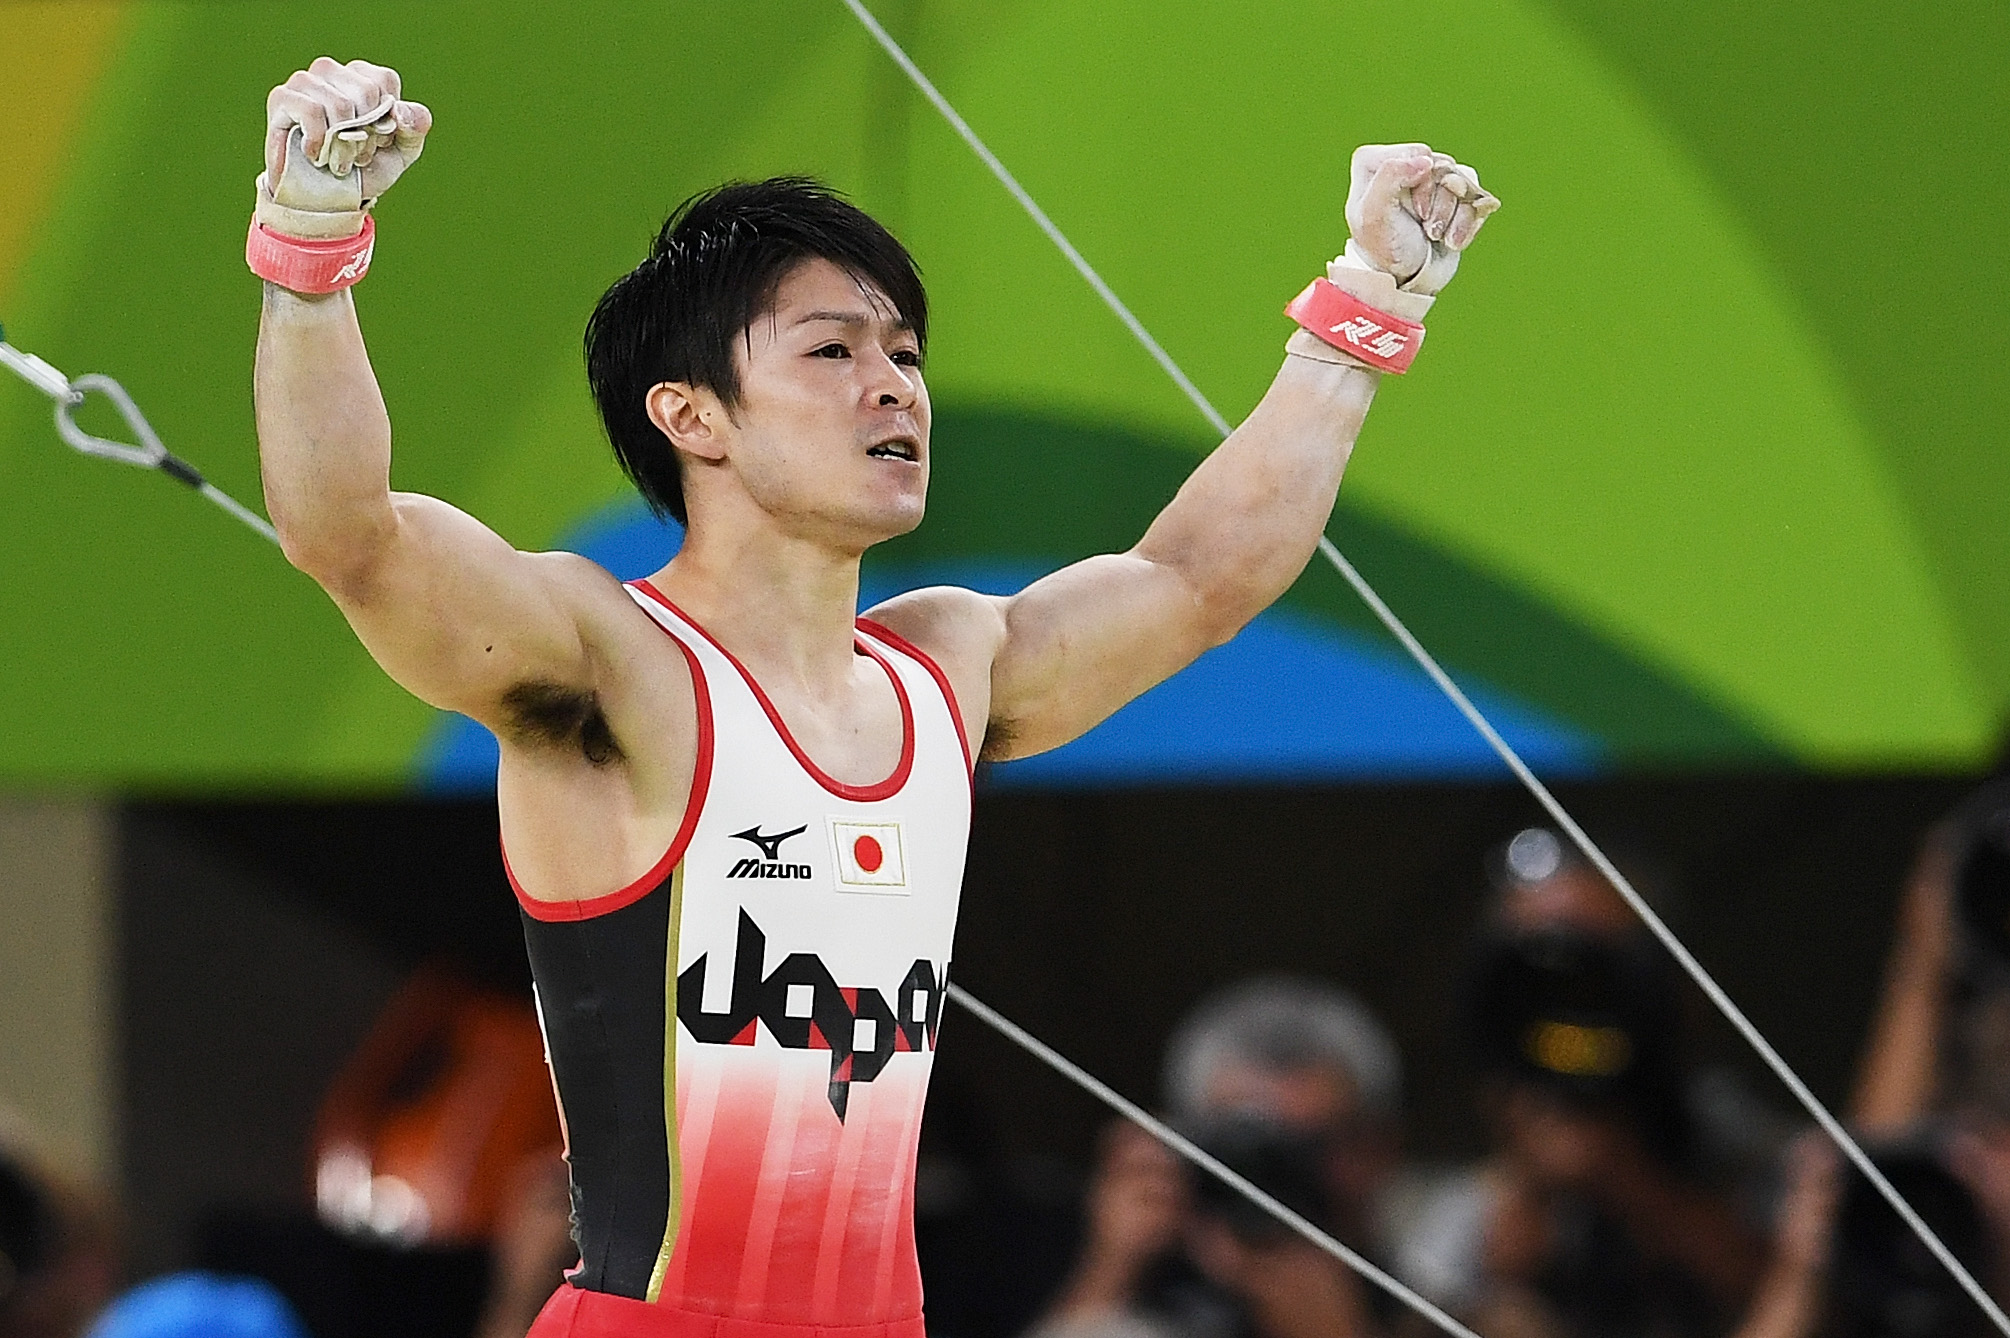 Kohei Uchimura of Japan reacts after competing on the horizontal bar during the Men's Individual All-Around final on Day 5 of the Rio 2016 Olympic Games at the Rio Olympic Arena on Aug. 10, 2016 in Rio de Janeiro.